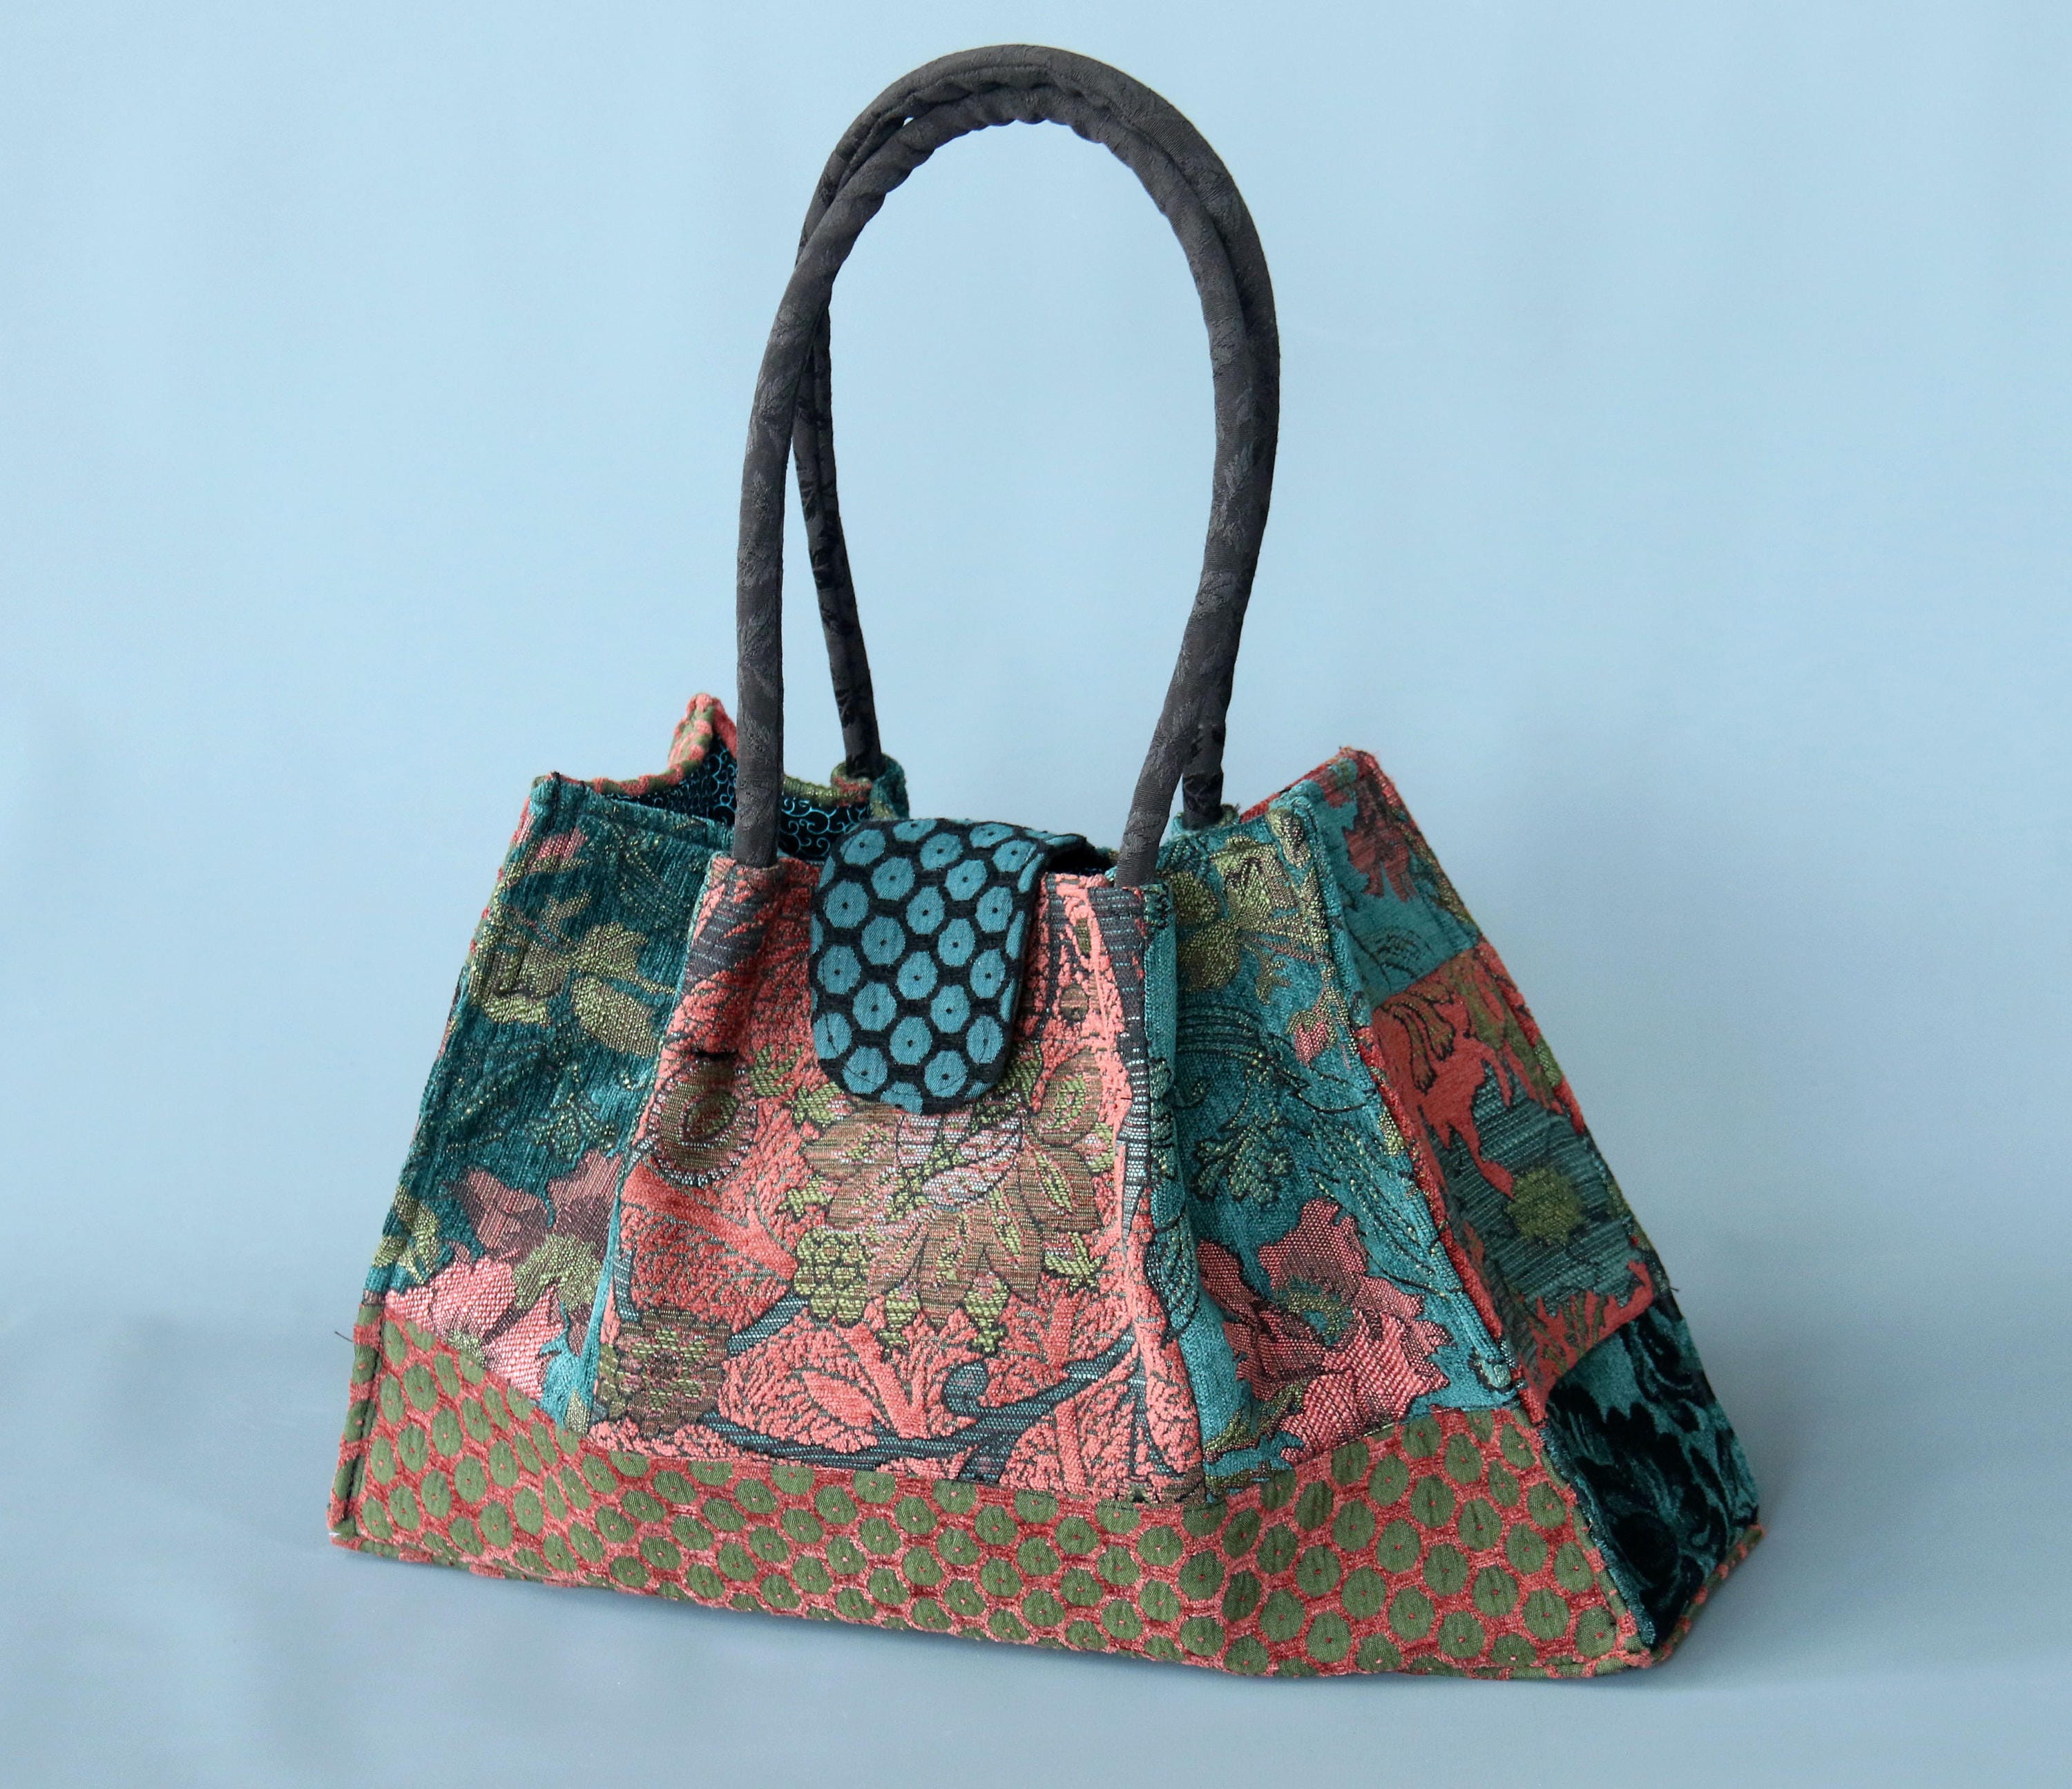 Zinnia Tapestry Shoulder Bag in Orange and Teal Floral Jacquard Woven ...